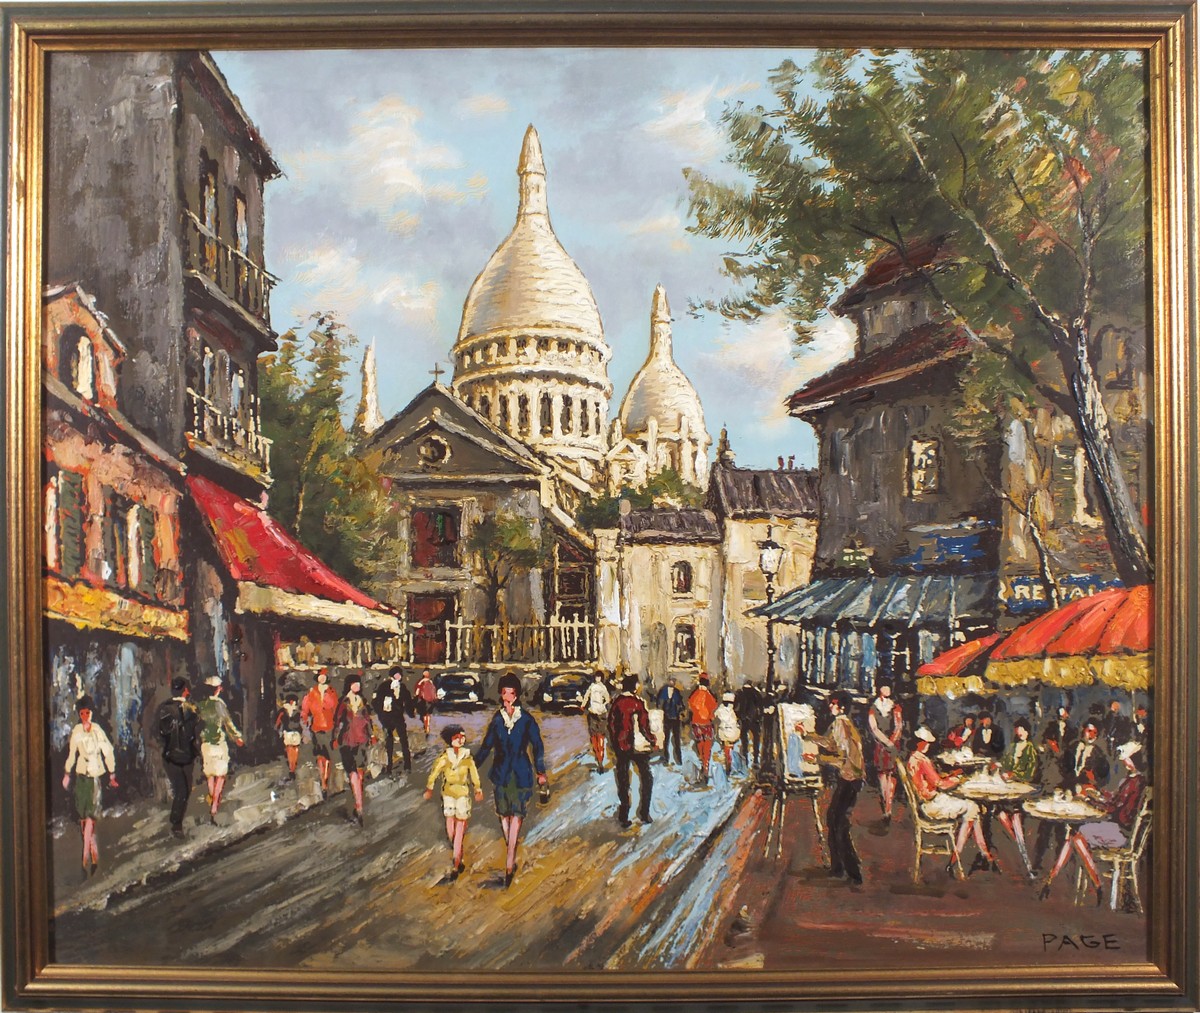 PAGE (20th/21st Century) Montmatre, Oil on canvas, Signed lower right, 20.75" x 24.75" (53cm x - Image 3 of 7